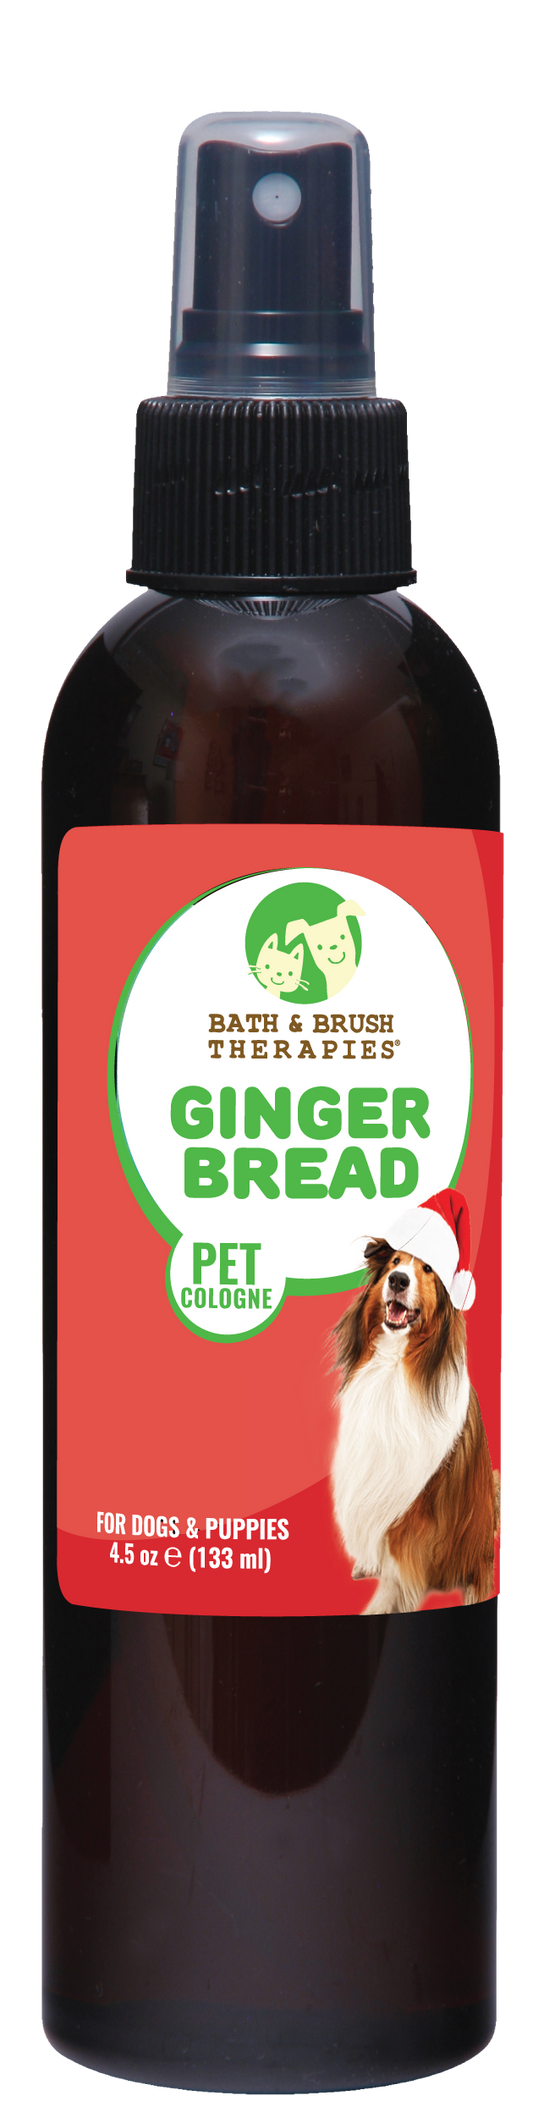 Gingerbread Pet Cologne | Bath & Brush Therapies®